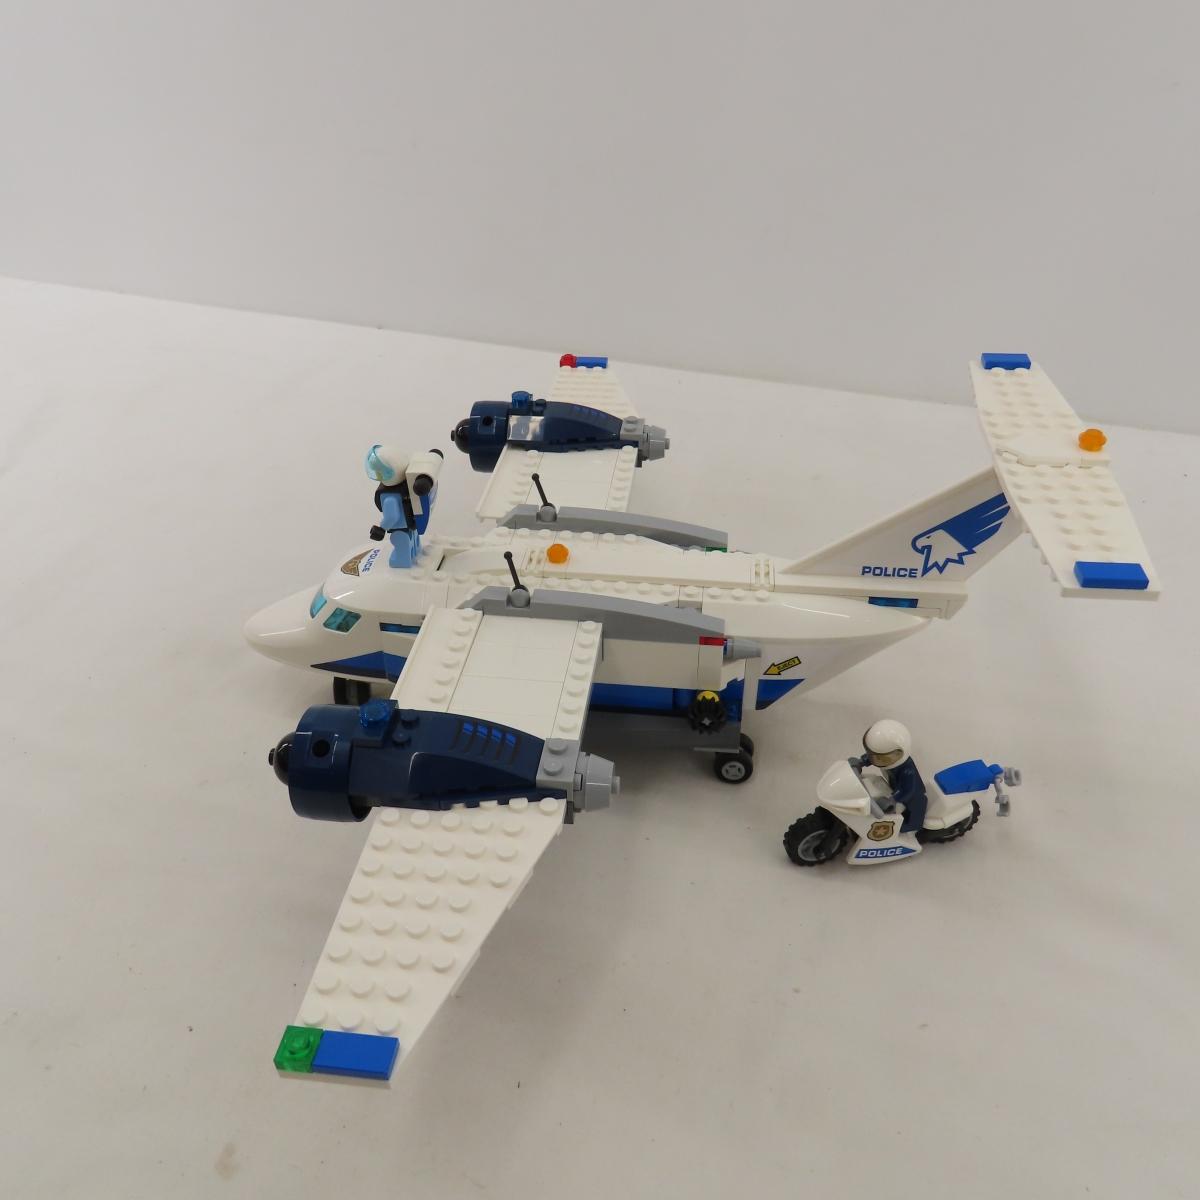 Lego City 4644, Basic 545 and more